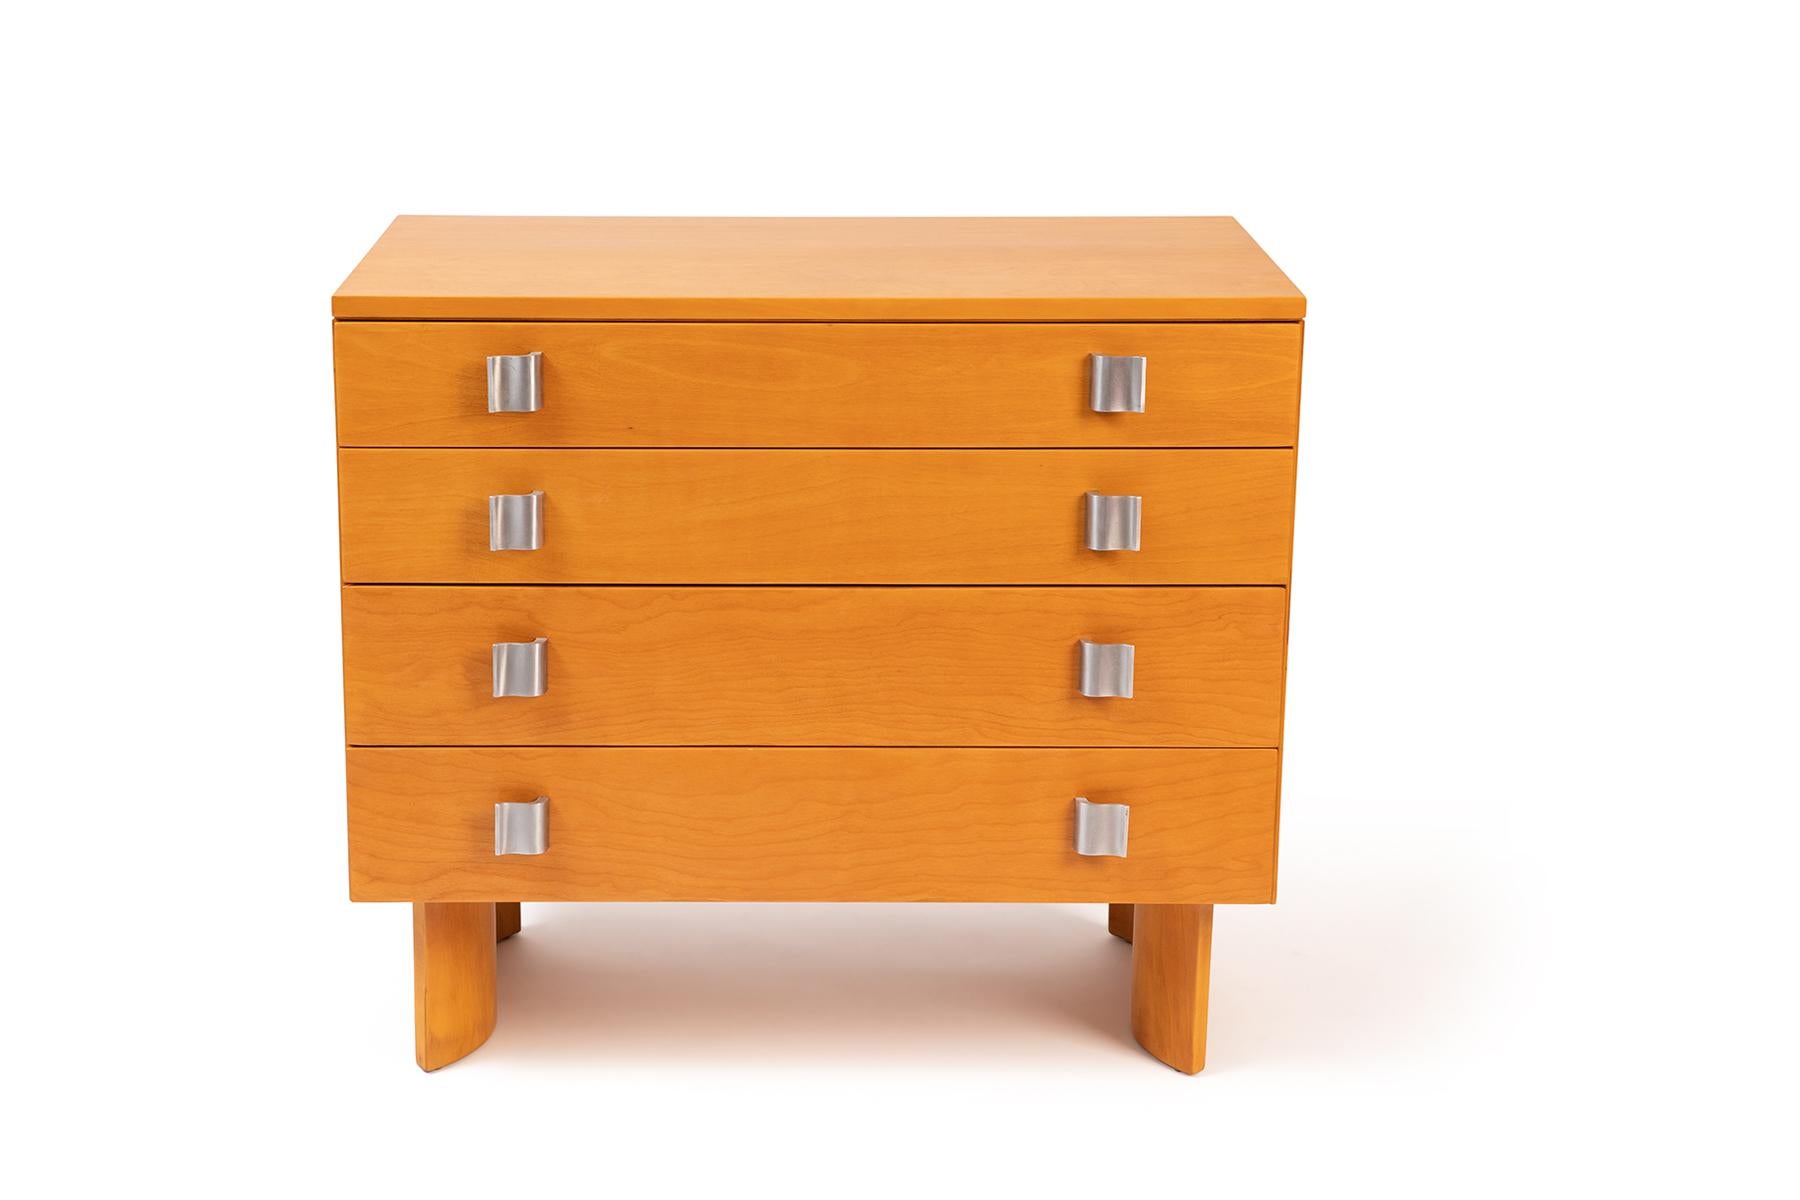 Eliel Saarinen for Johnson Furniture Company chests of drawers circa 1948. These seldom seen examples have sculptural S-shaped legs, formed aluminum handles and beautifully grained birch cases and drawer fronts. There are three of these available.